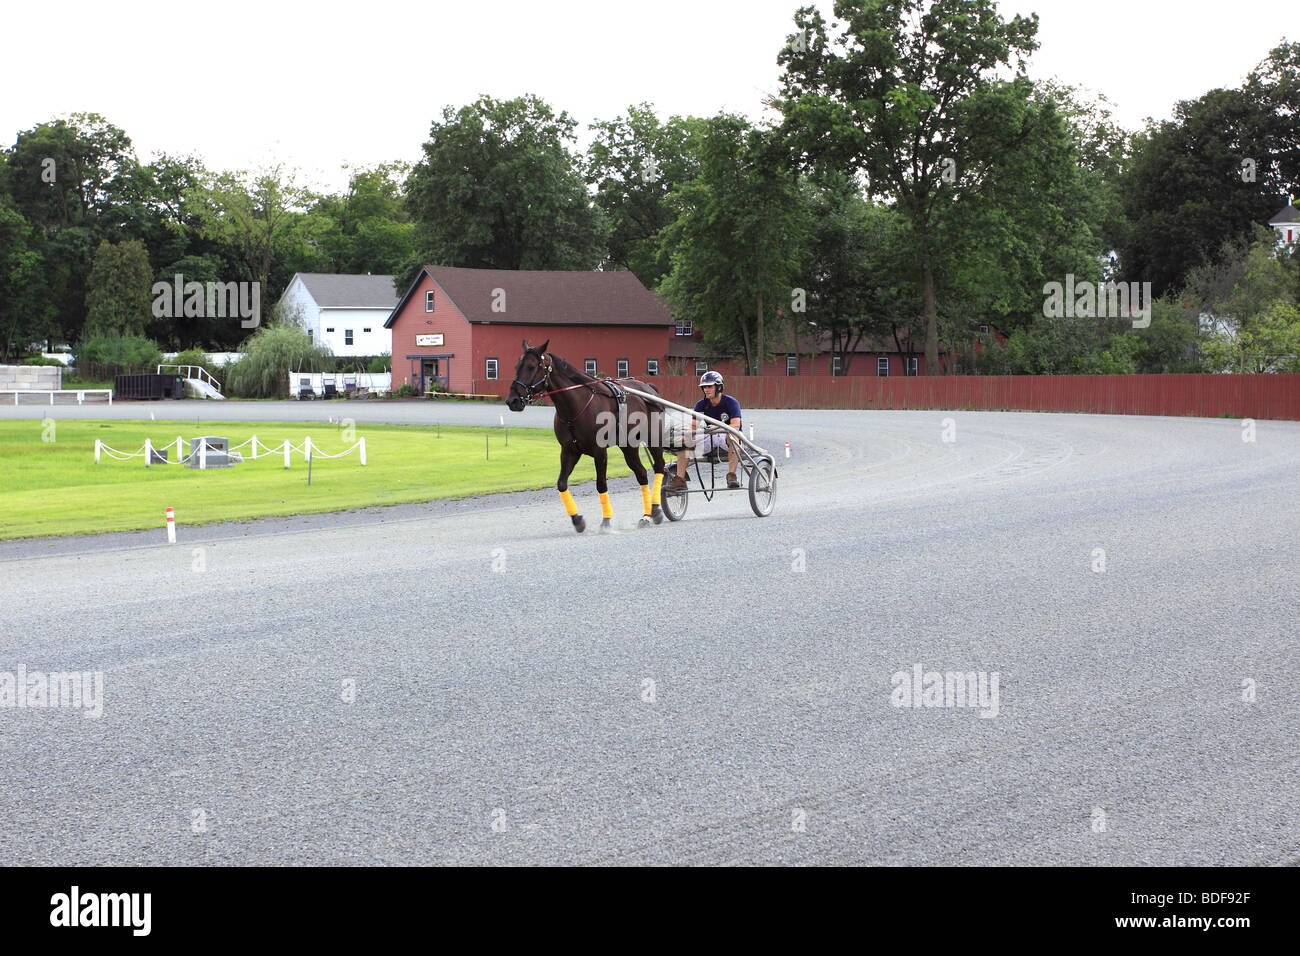 Harness racing horse being trained, Historic Track, Goshen, NY Stock Photo